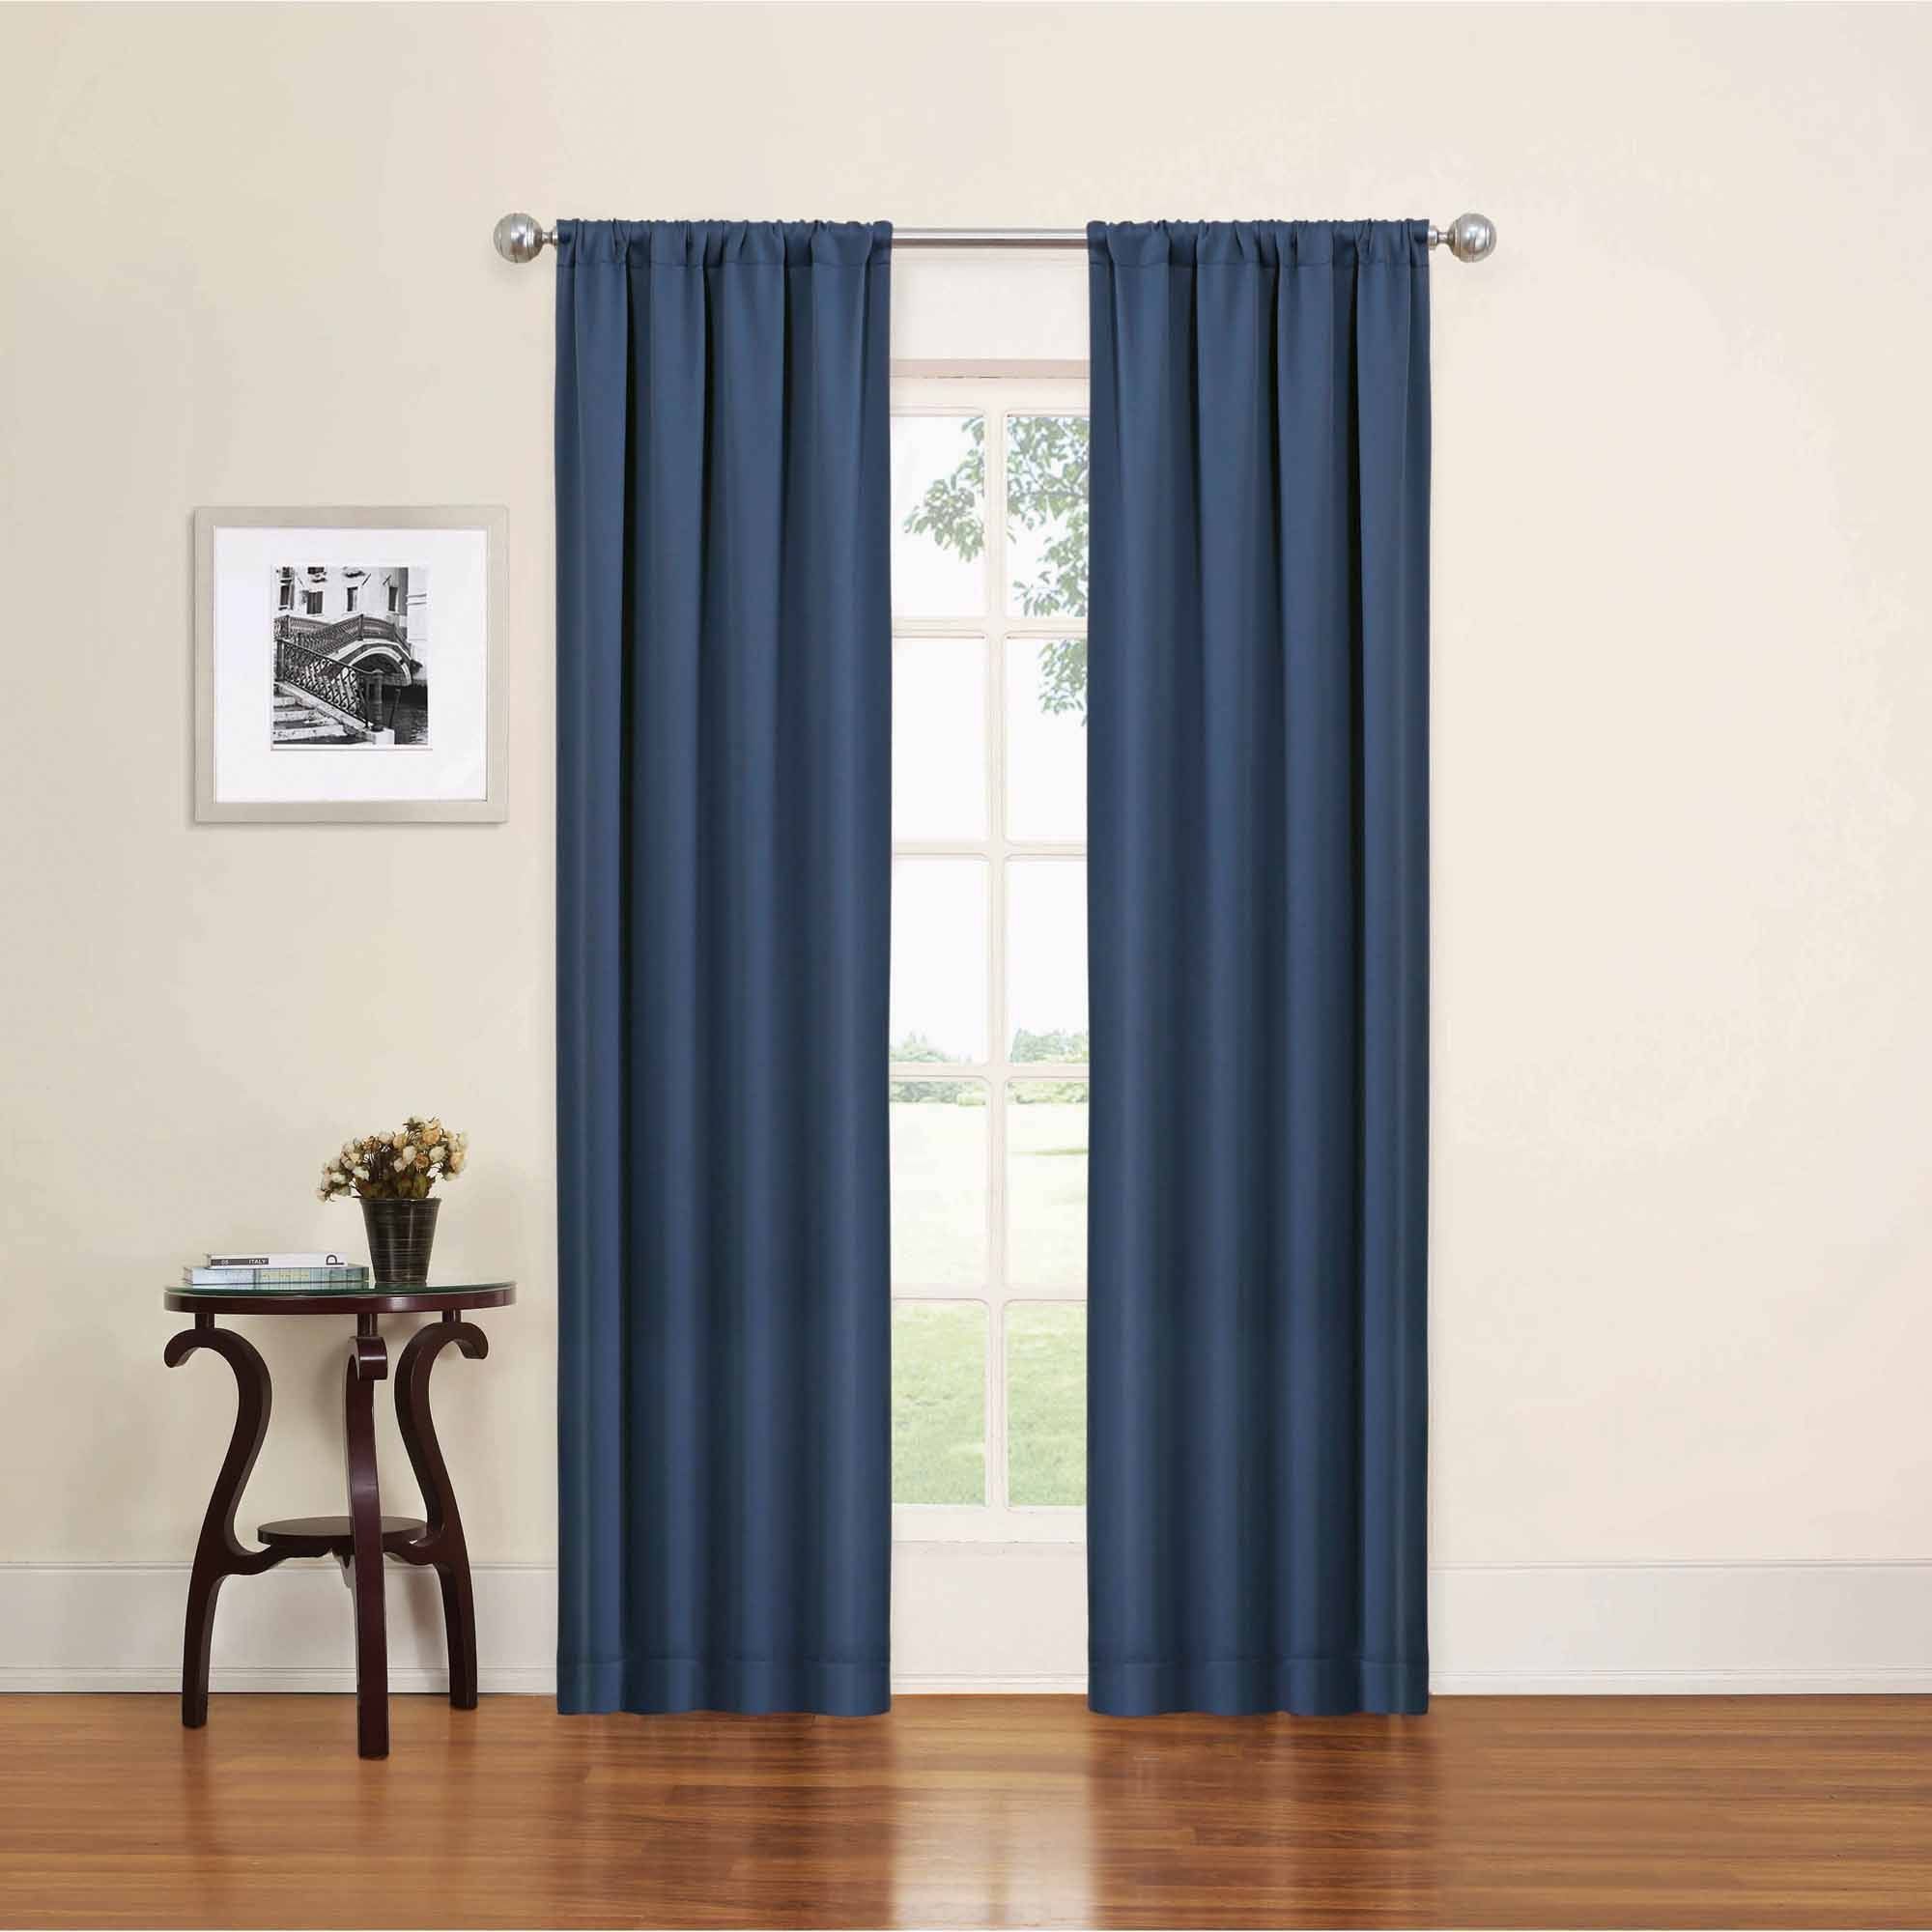 Interior 92 Inch Curtains With Walmart Drapes Within 92 Inches Long Curtains (View 19 of 25)